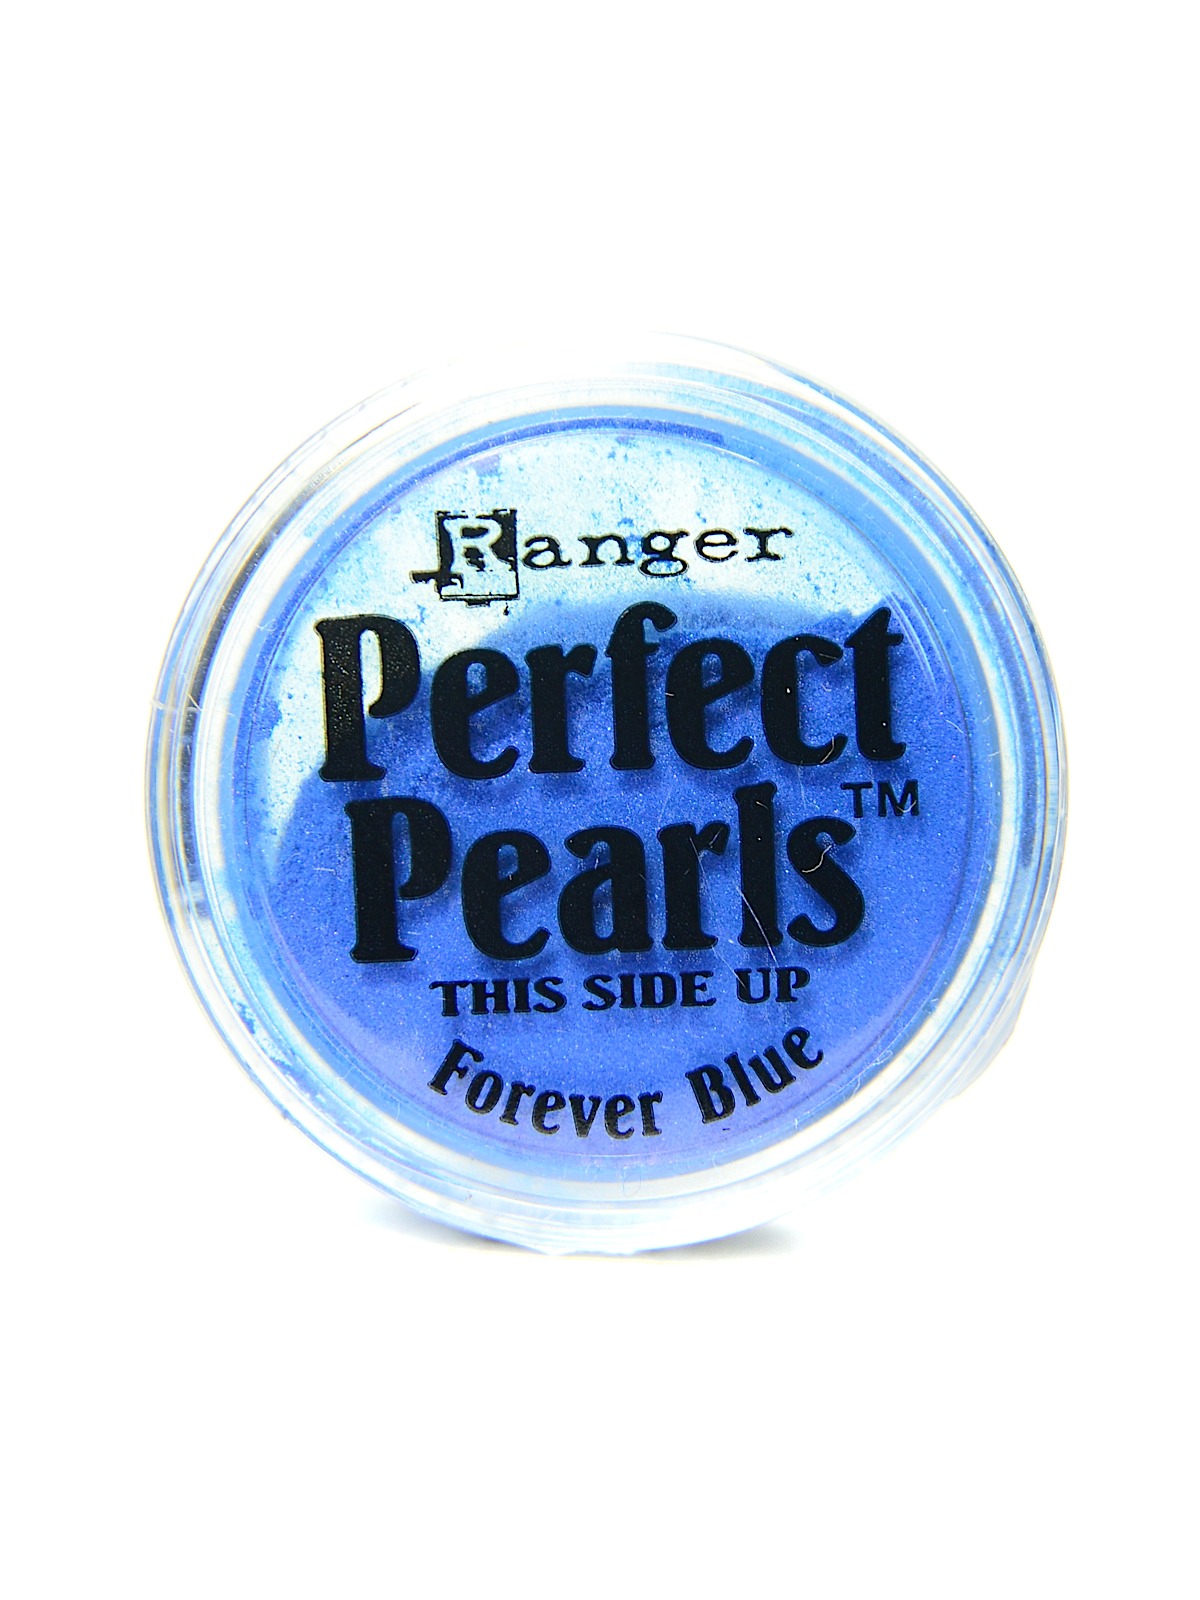 Perfect Pearls Powder Pigments Forever Blue Jar